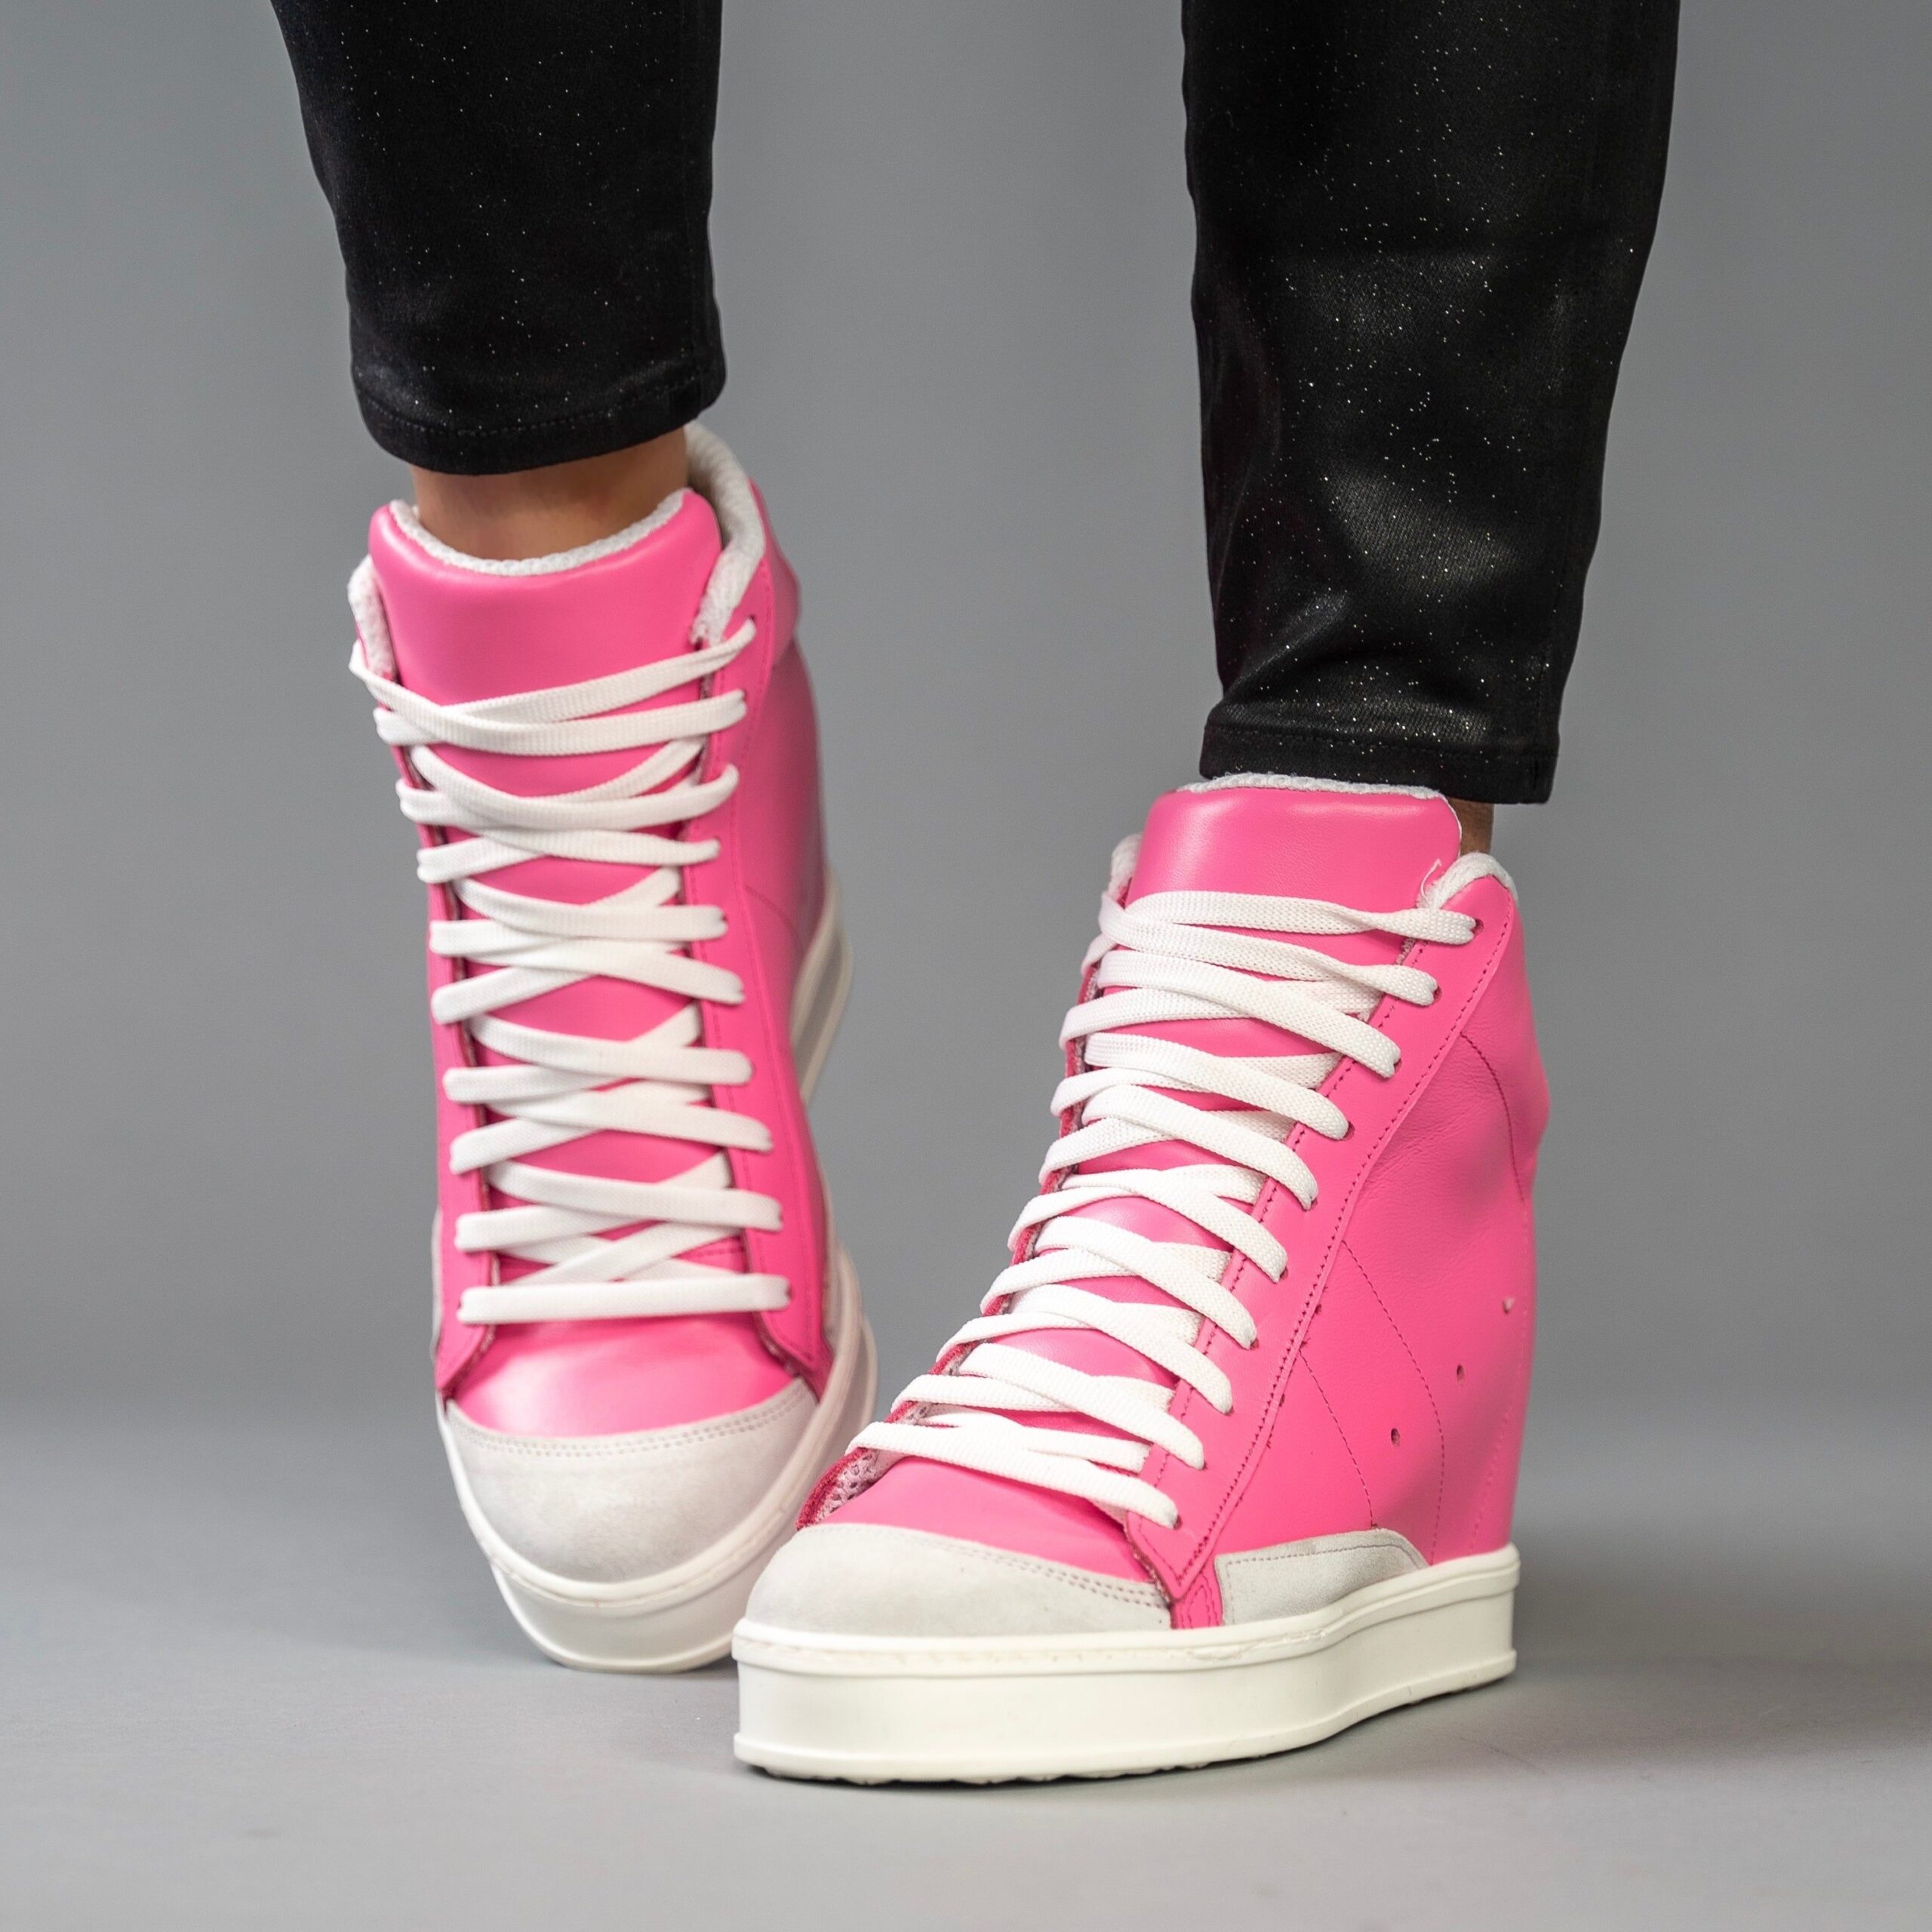 How to Wear Hidden Wedge Sneakers: 13 Youthful Outfit Ideas for Ladies